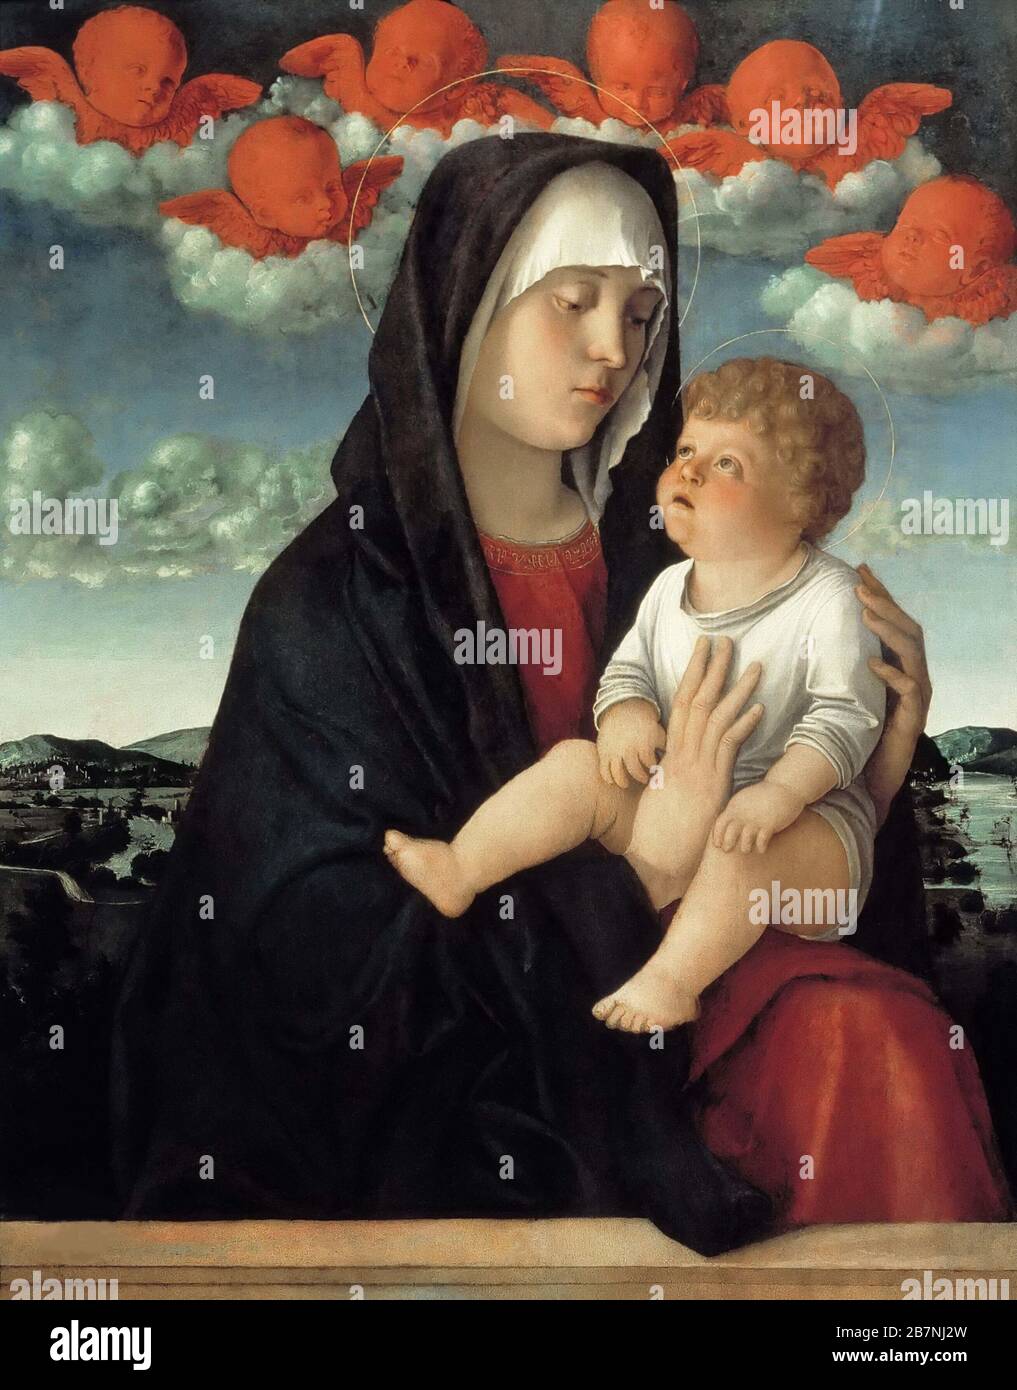 The Virgin and child  , c. 1500. Found in the Collection of Gallerie dell'Accademia, Venice. Stock Photo